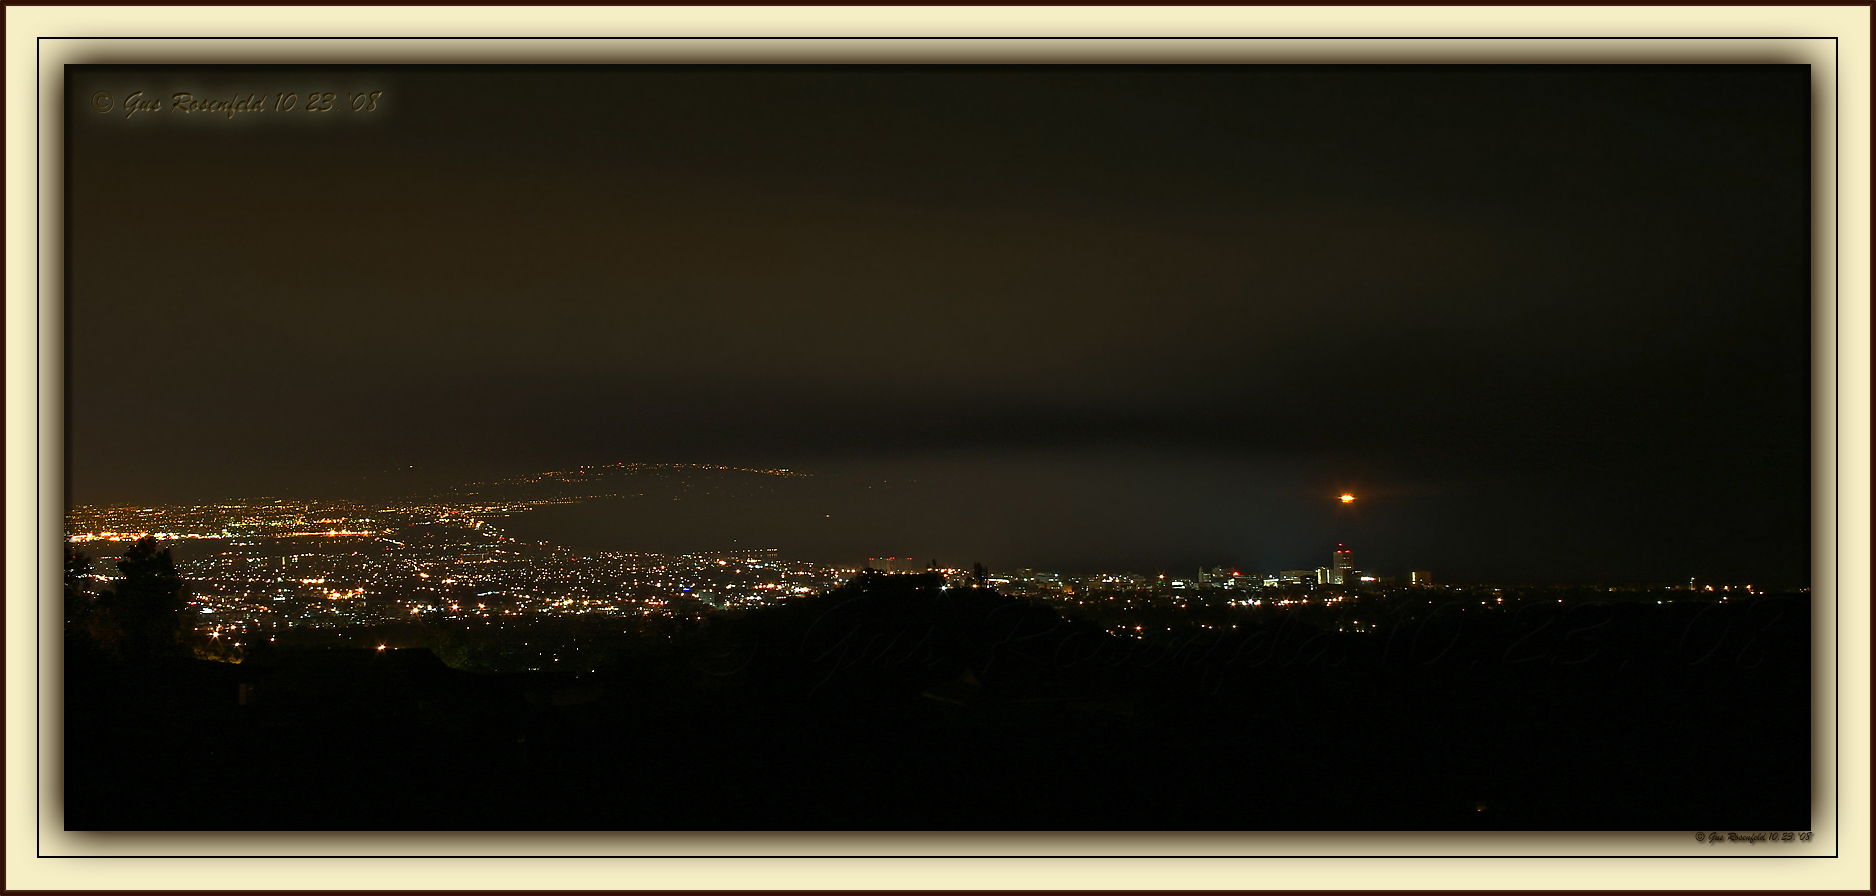 Inversion Layered Bifurcation Of Smoke Across Santa Monica Bay From Early Morning Fire By Getty Museum